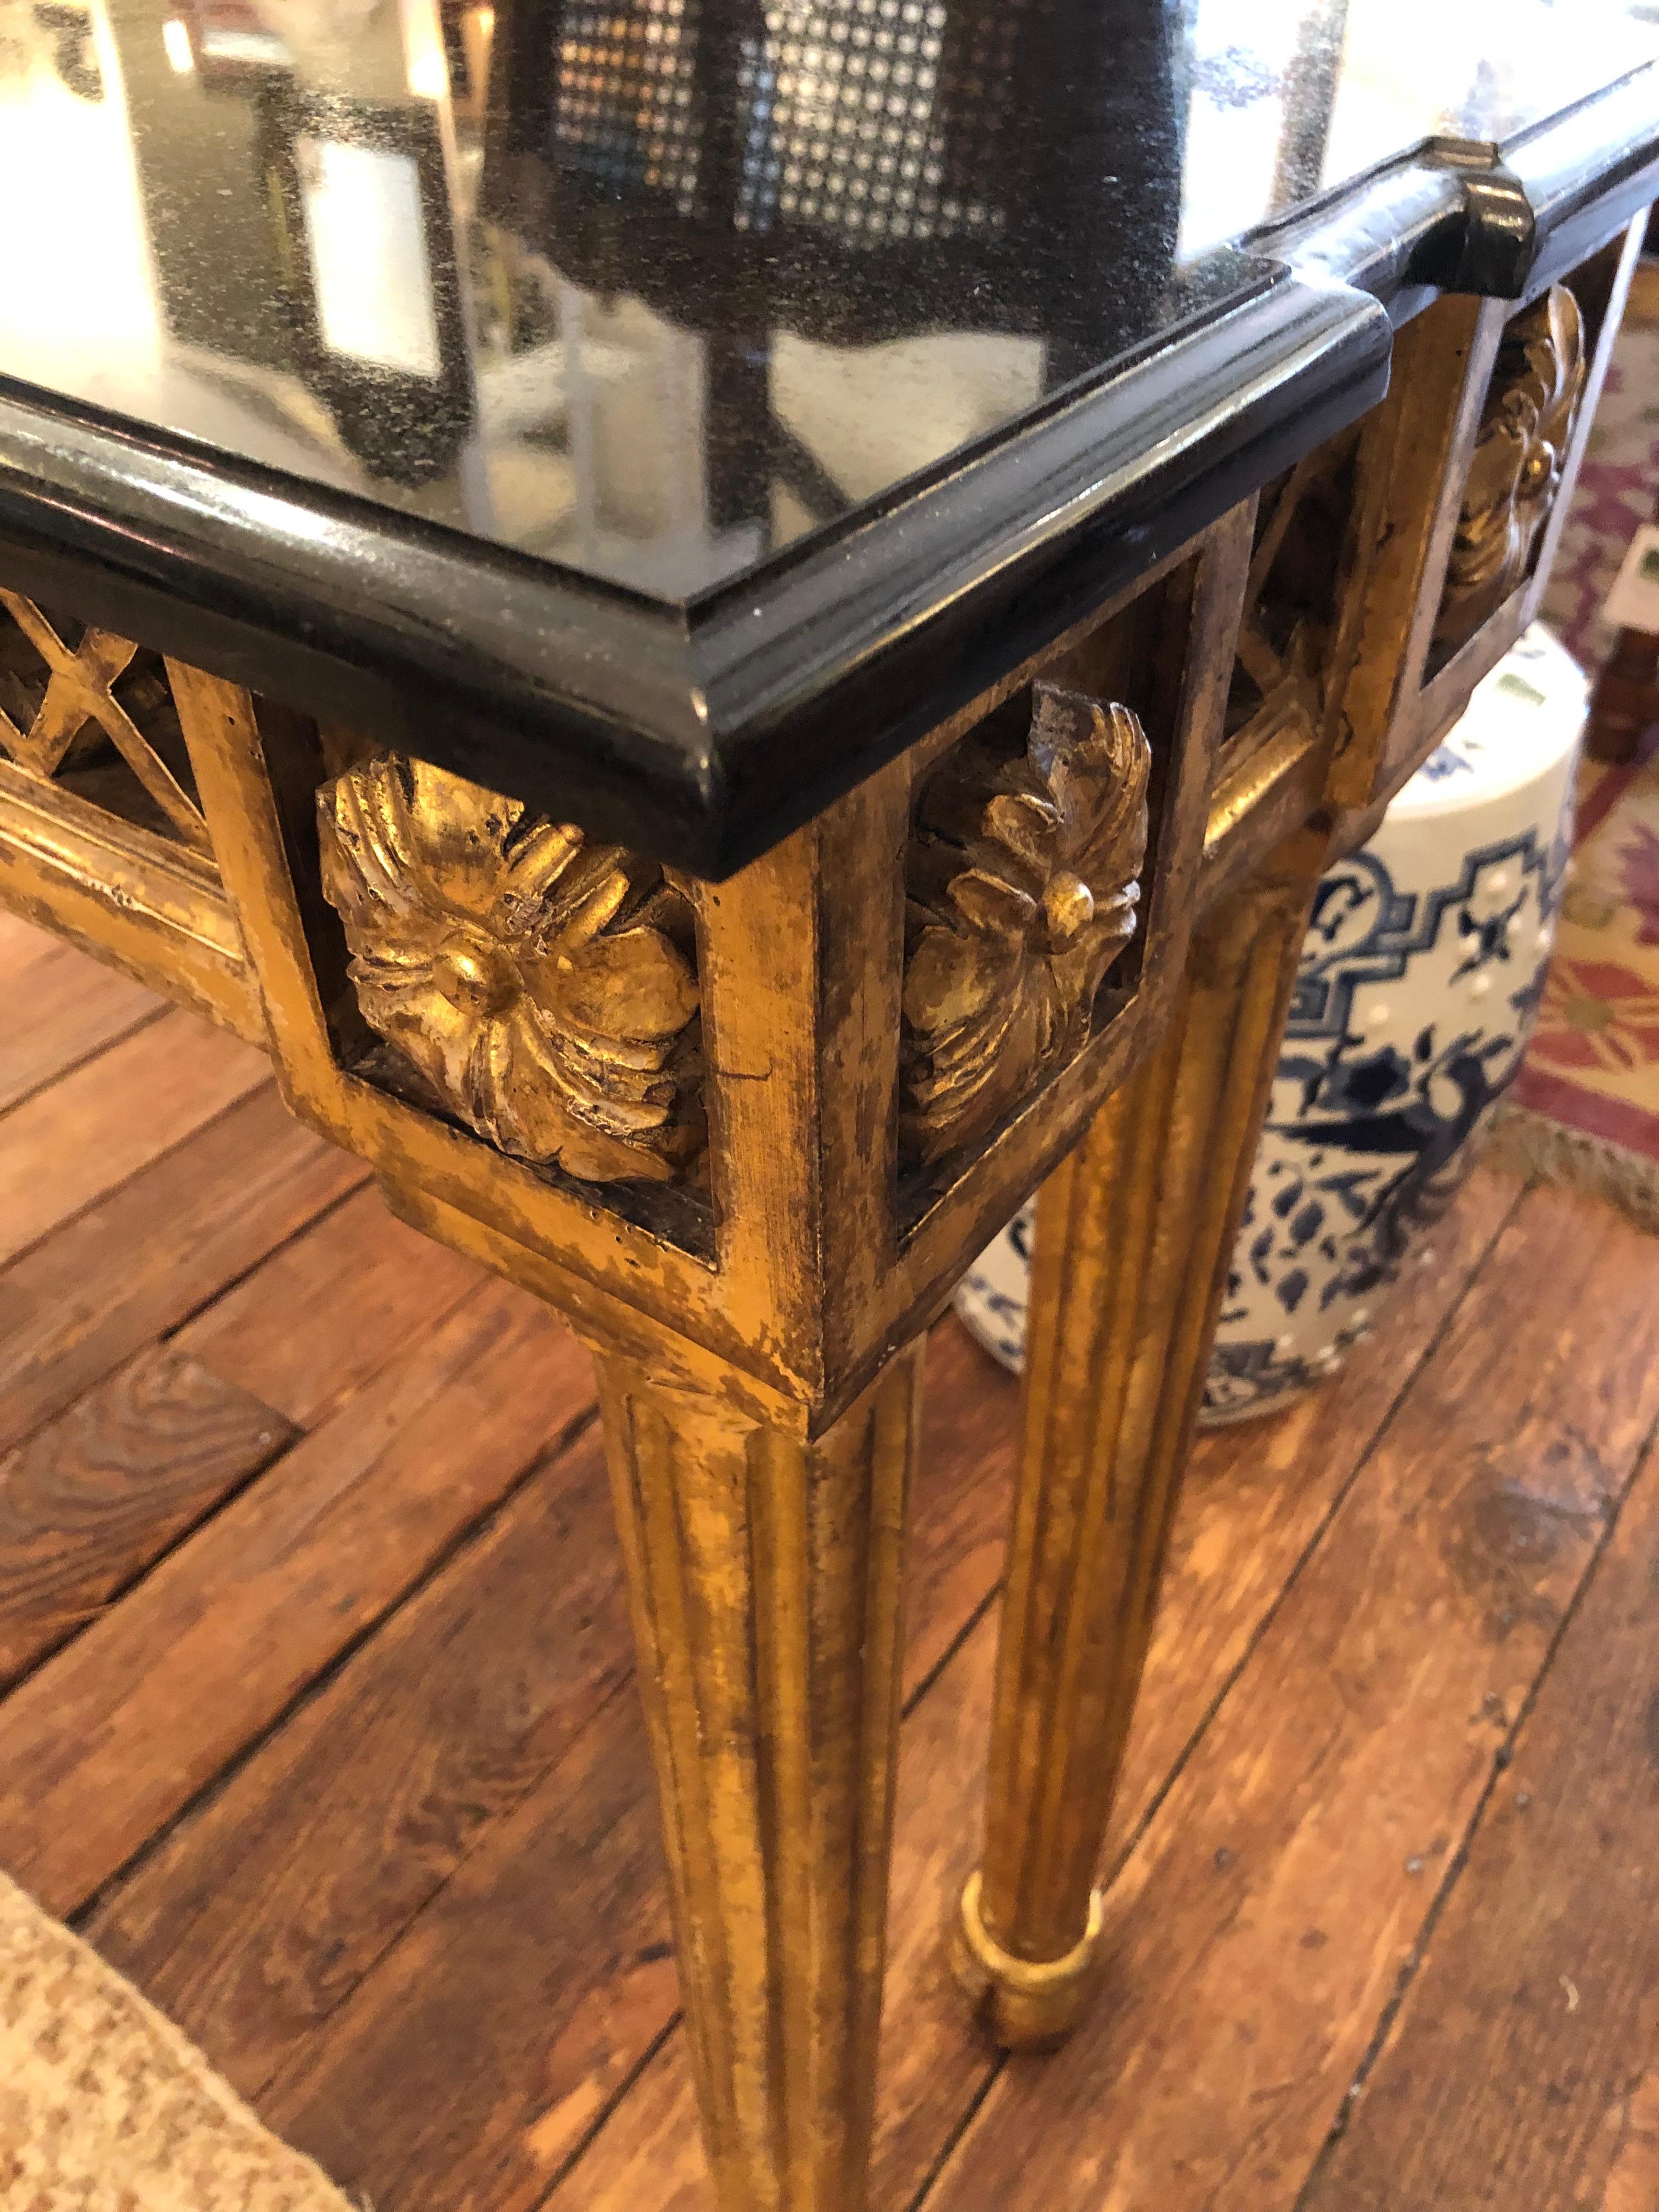 Glamorous blend of gold and black in this Hollywood Regency giltwood and marble console table. The center rams head adds a moviestar touch, and the cut out ends of the console top make the black top especially elegant. Tapered carved legs and lovely